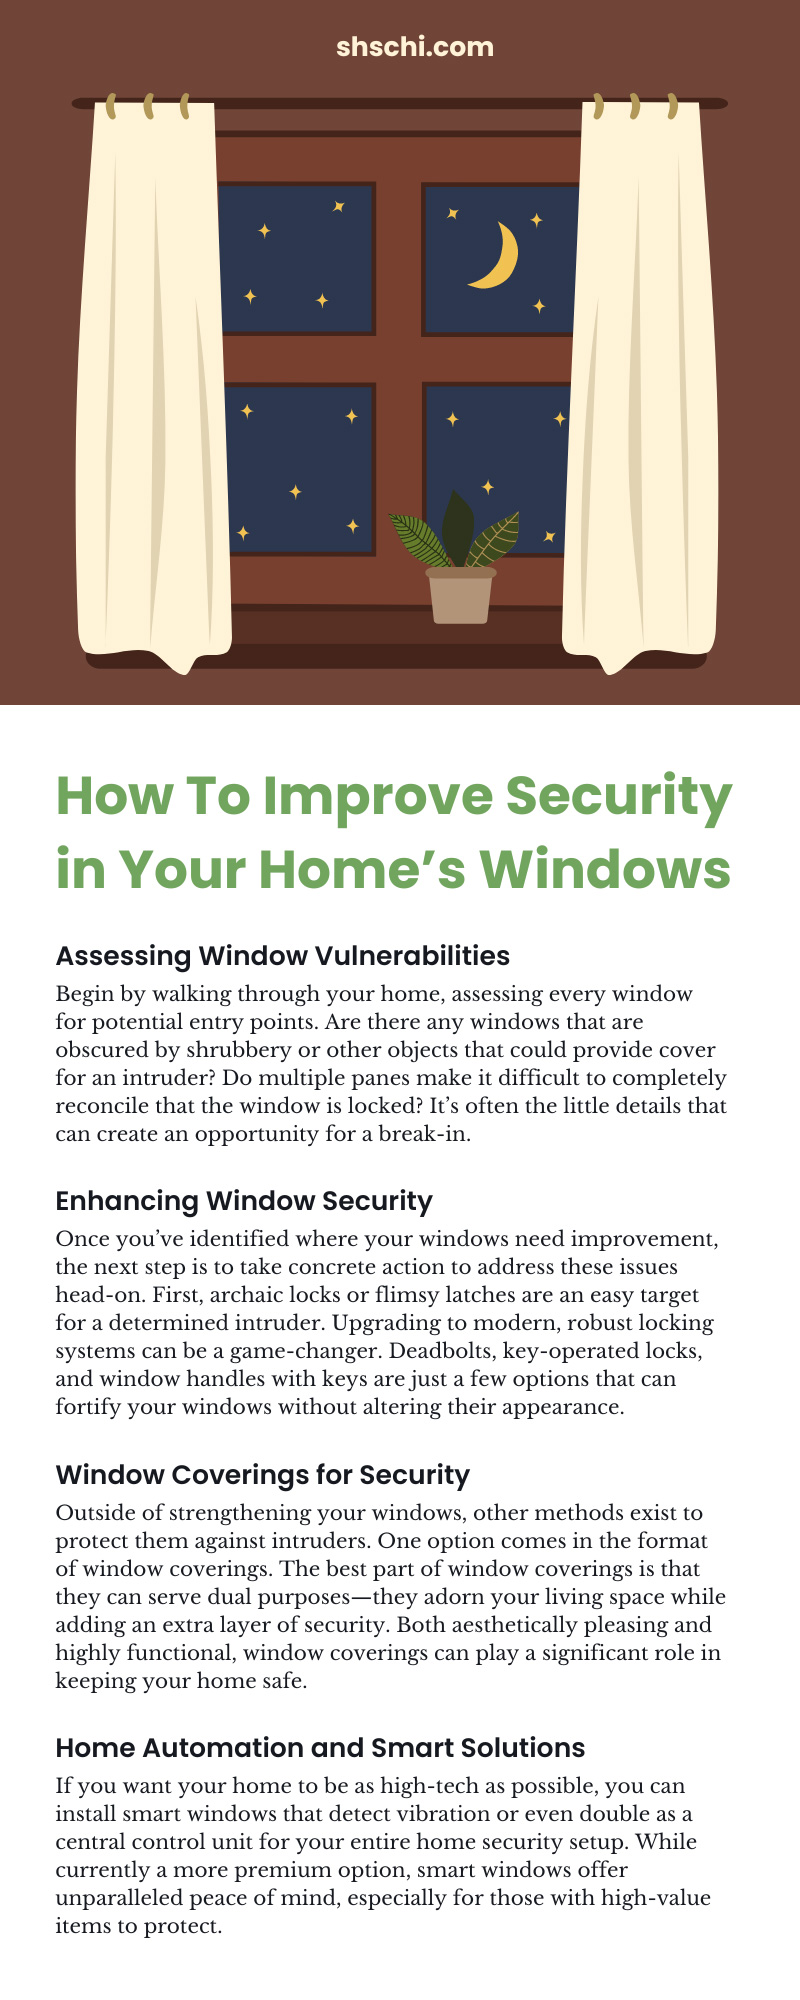 How To Improve Security in Your Home’s Windows